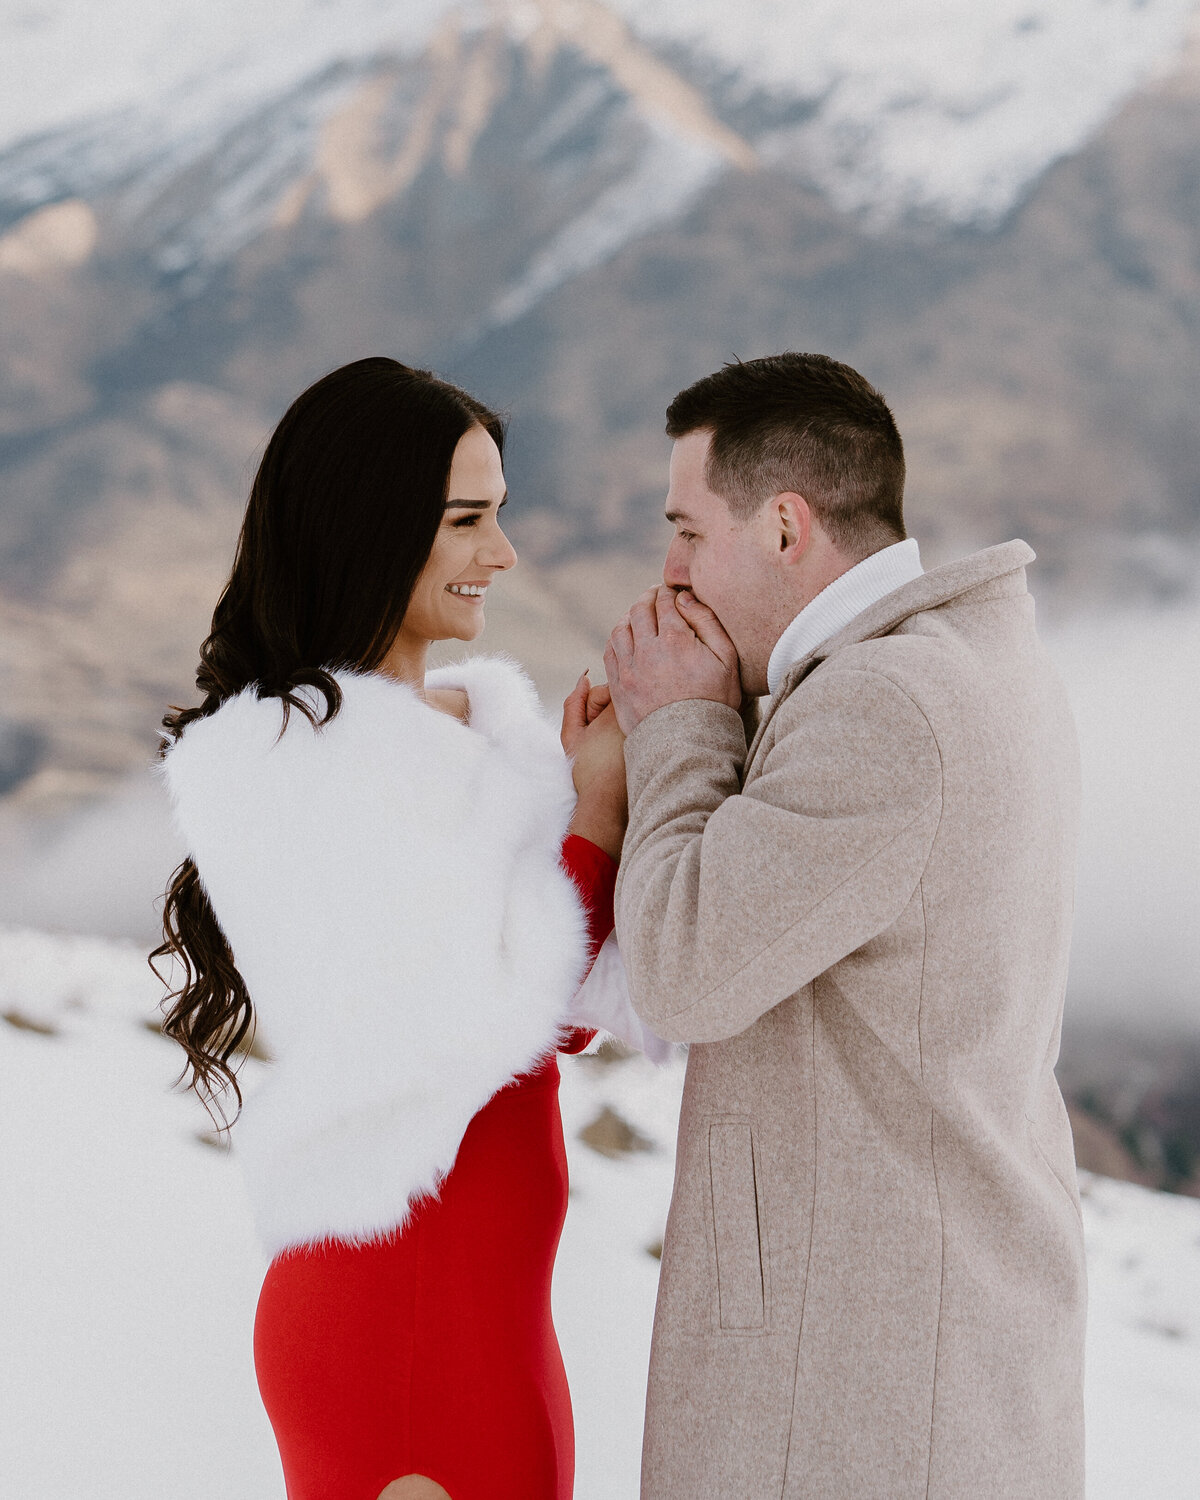 M+B-engagement-laughterintherainphotography.co.nz-270